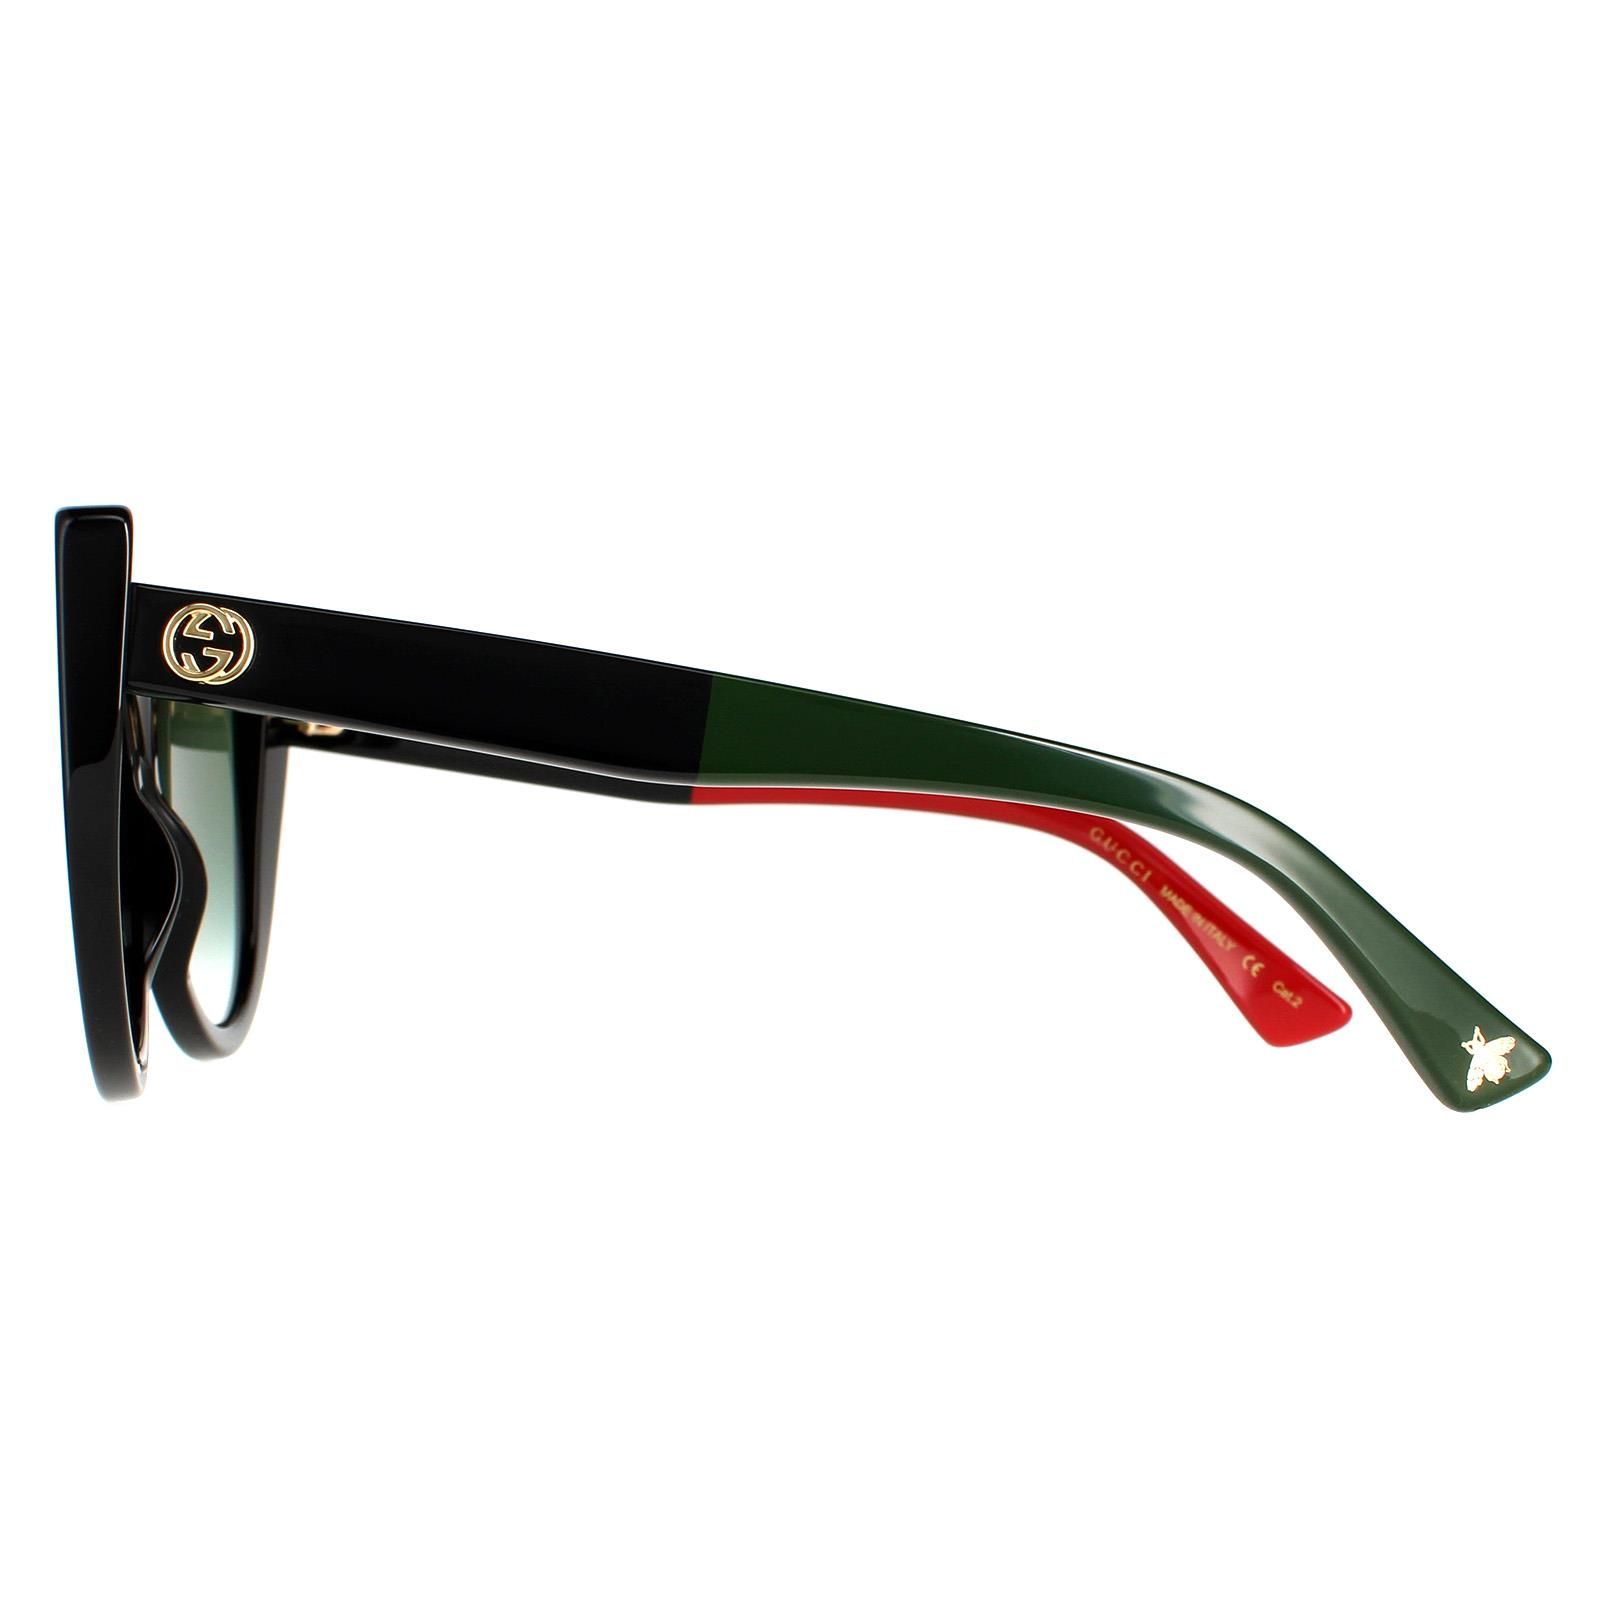 Gucci Cat Eye Womens Black with Red and Green Green Gradient GG0164SN Sunglasses are a gorgeous cat eye style crafted from chunky acetate embellished with a metal interlocking GG logo next to the hinges and bumblebee at the tip.